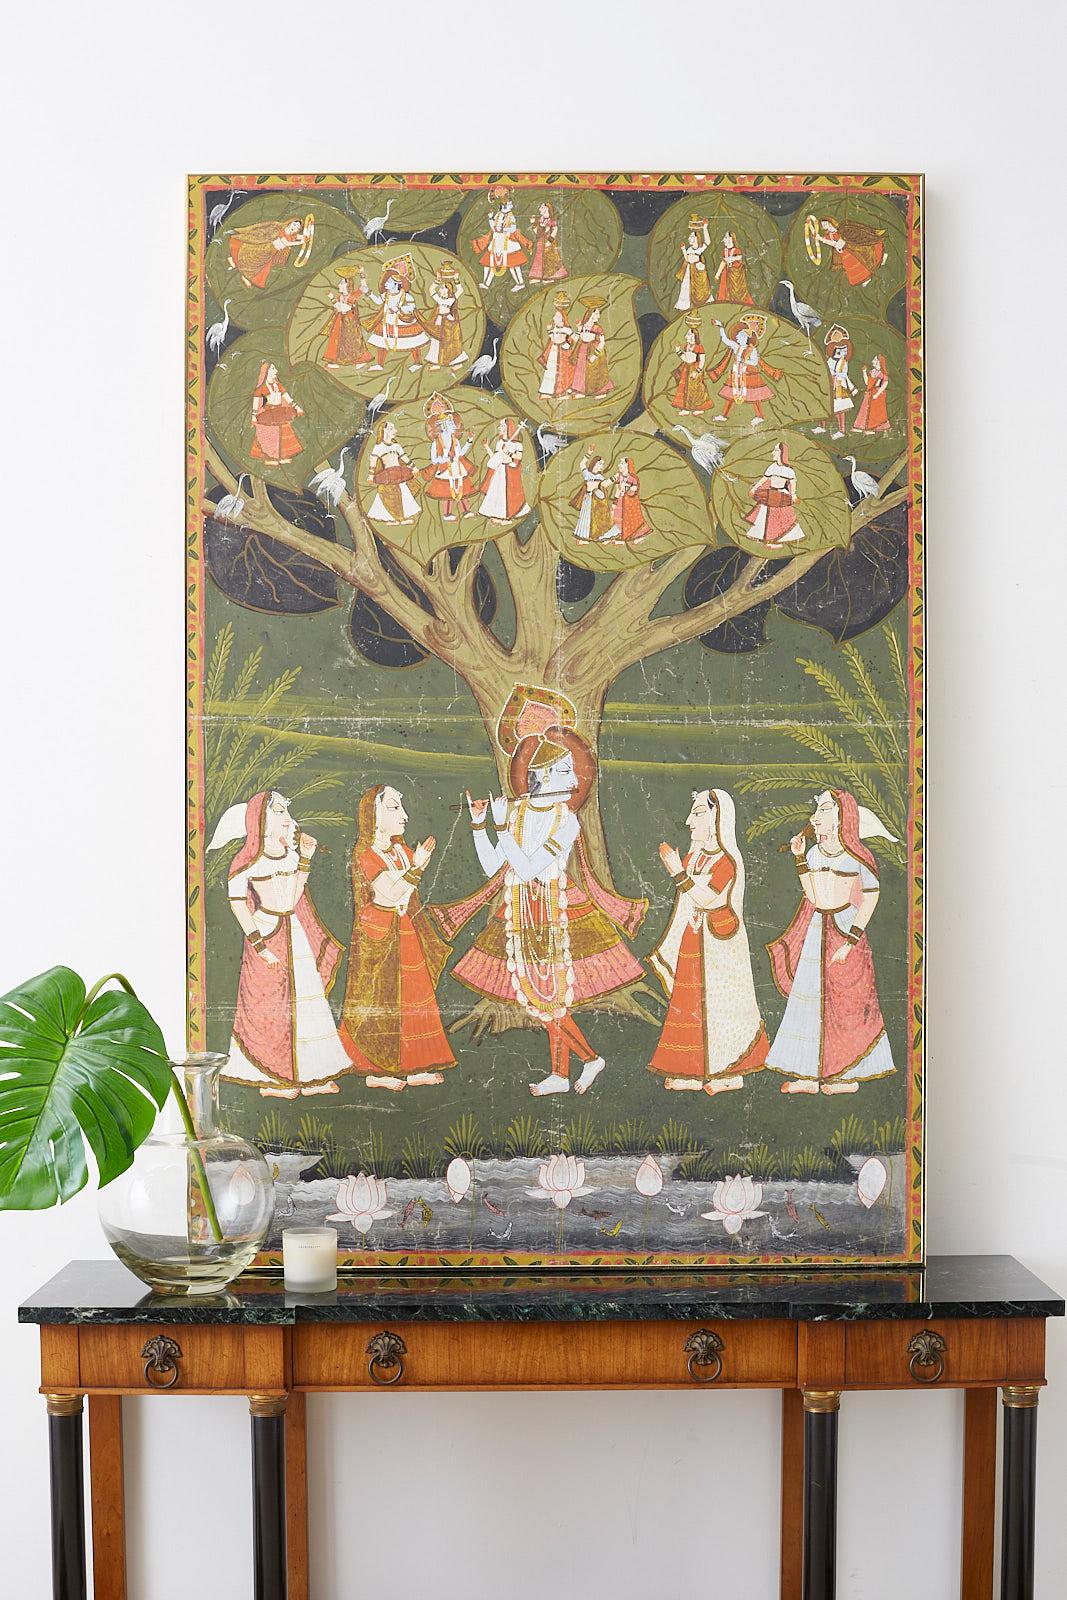 Colorful Pichhwai painting of Hindu deity Krishna depicted under the tree of life. He is playing a basuri flute for gopis of milkmaids. In the tree he is depicted six more times in various scenes with gopis and white cranes watching. Vibrant colors